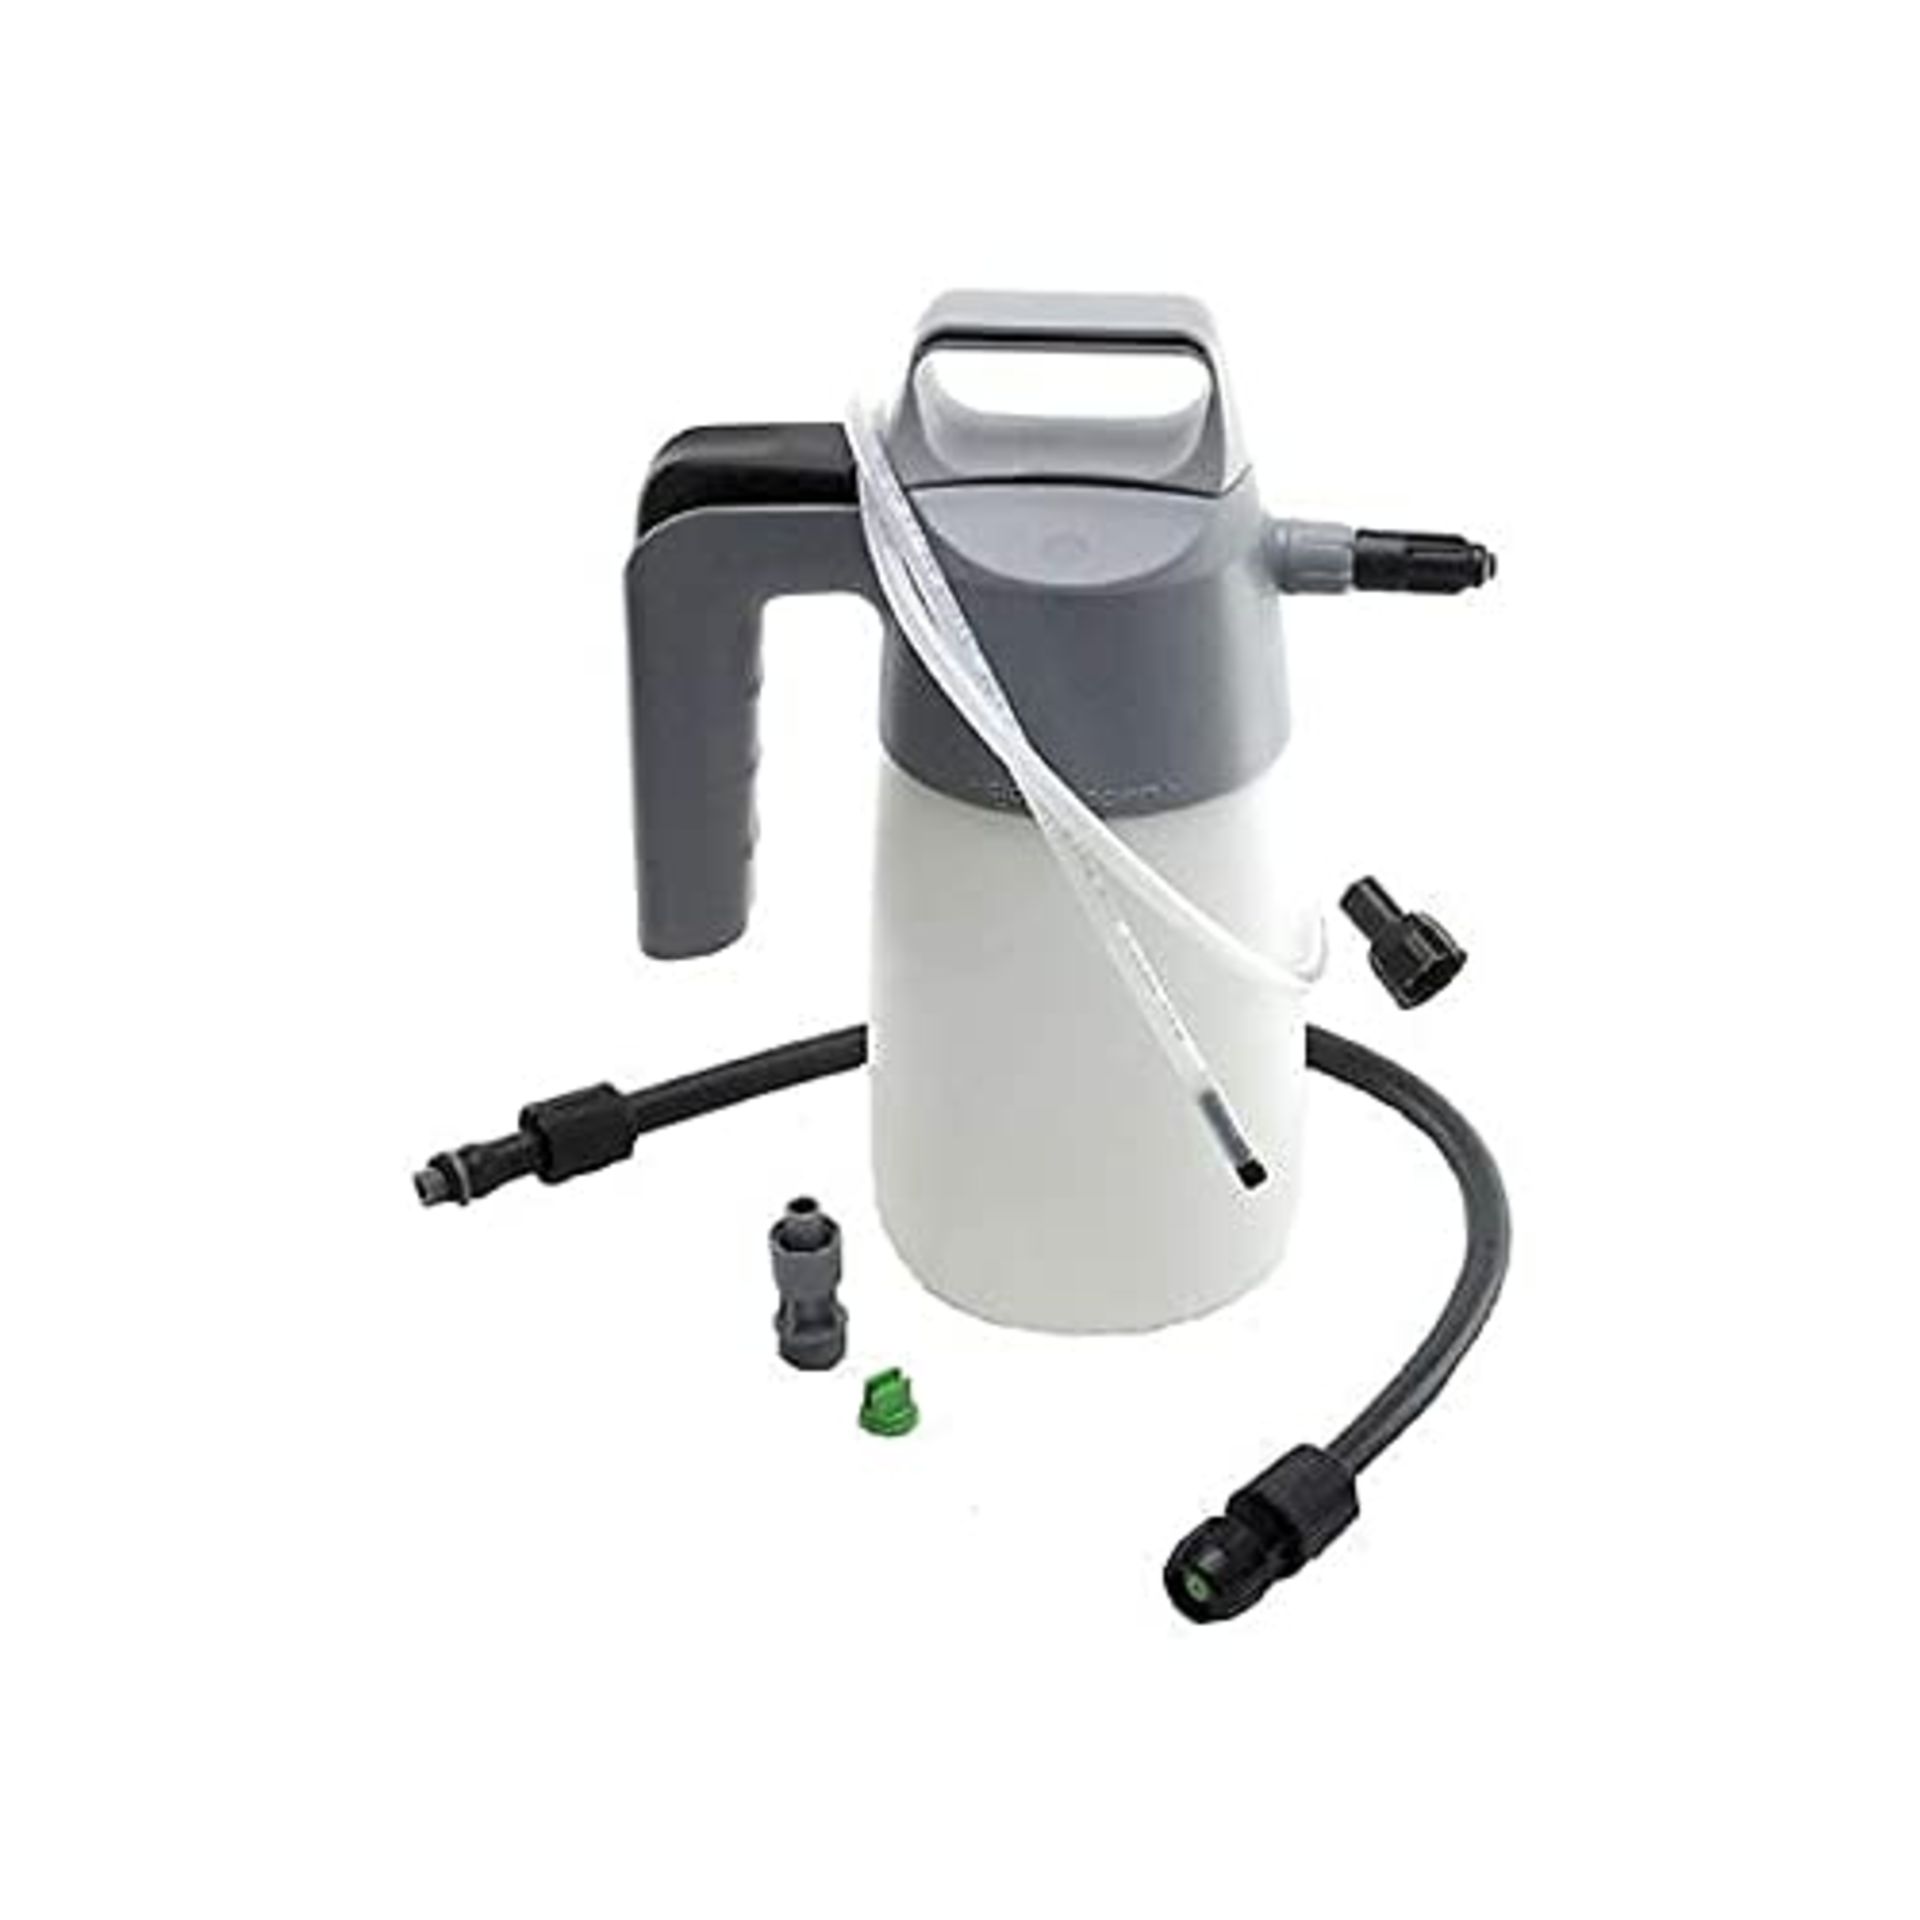 Waxoyl High Pressure Sprayer Kit with Extension Hose and Spray Nozzle for Car Wax Spra - Image 3 of 3